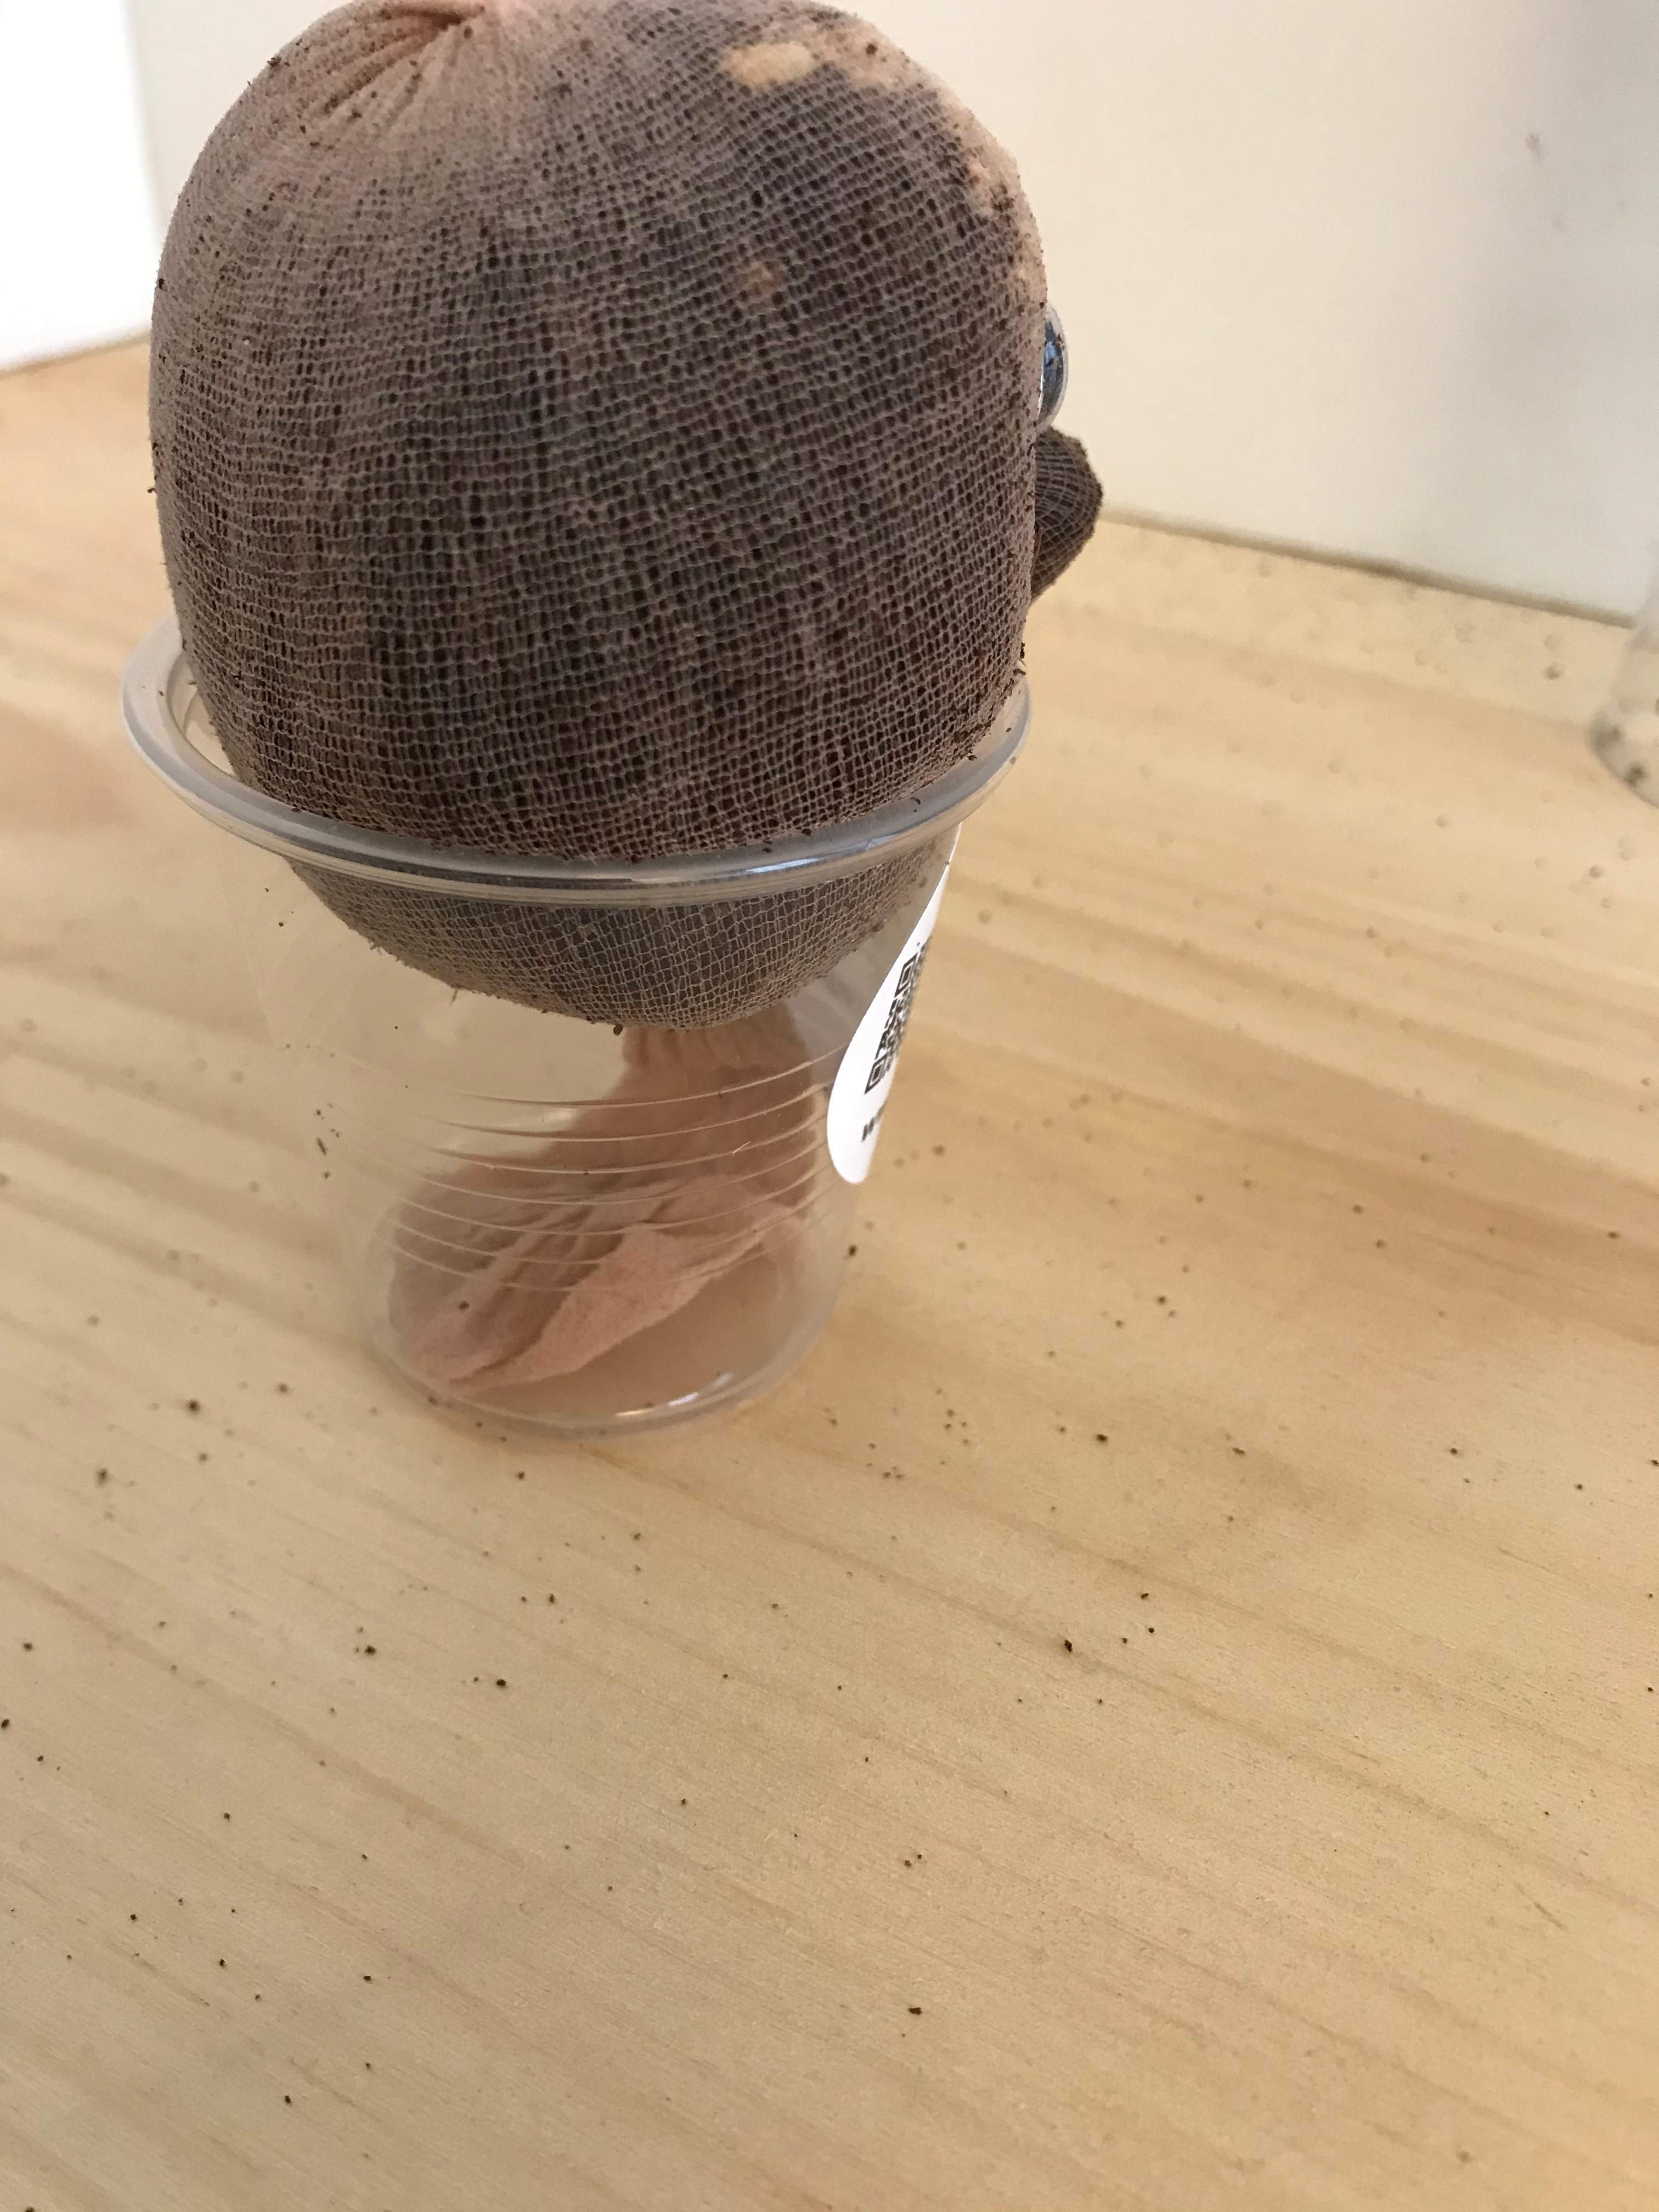 Place him into the cup with the nose resting on the edge with the remaining piece of sock inside the